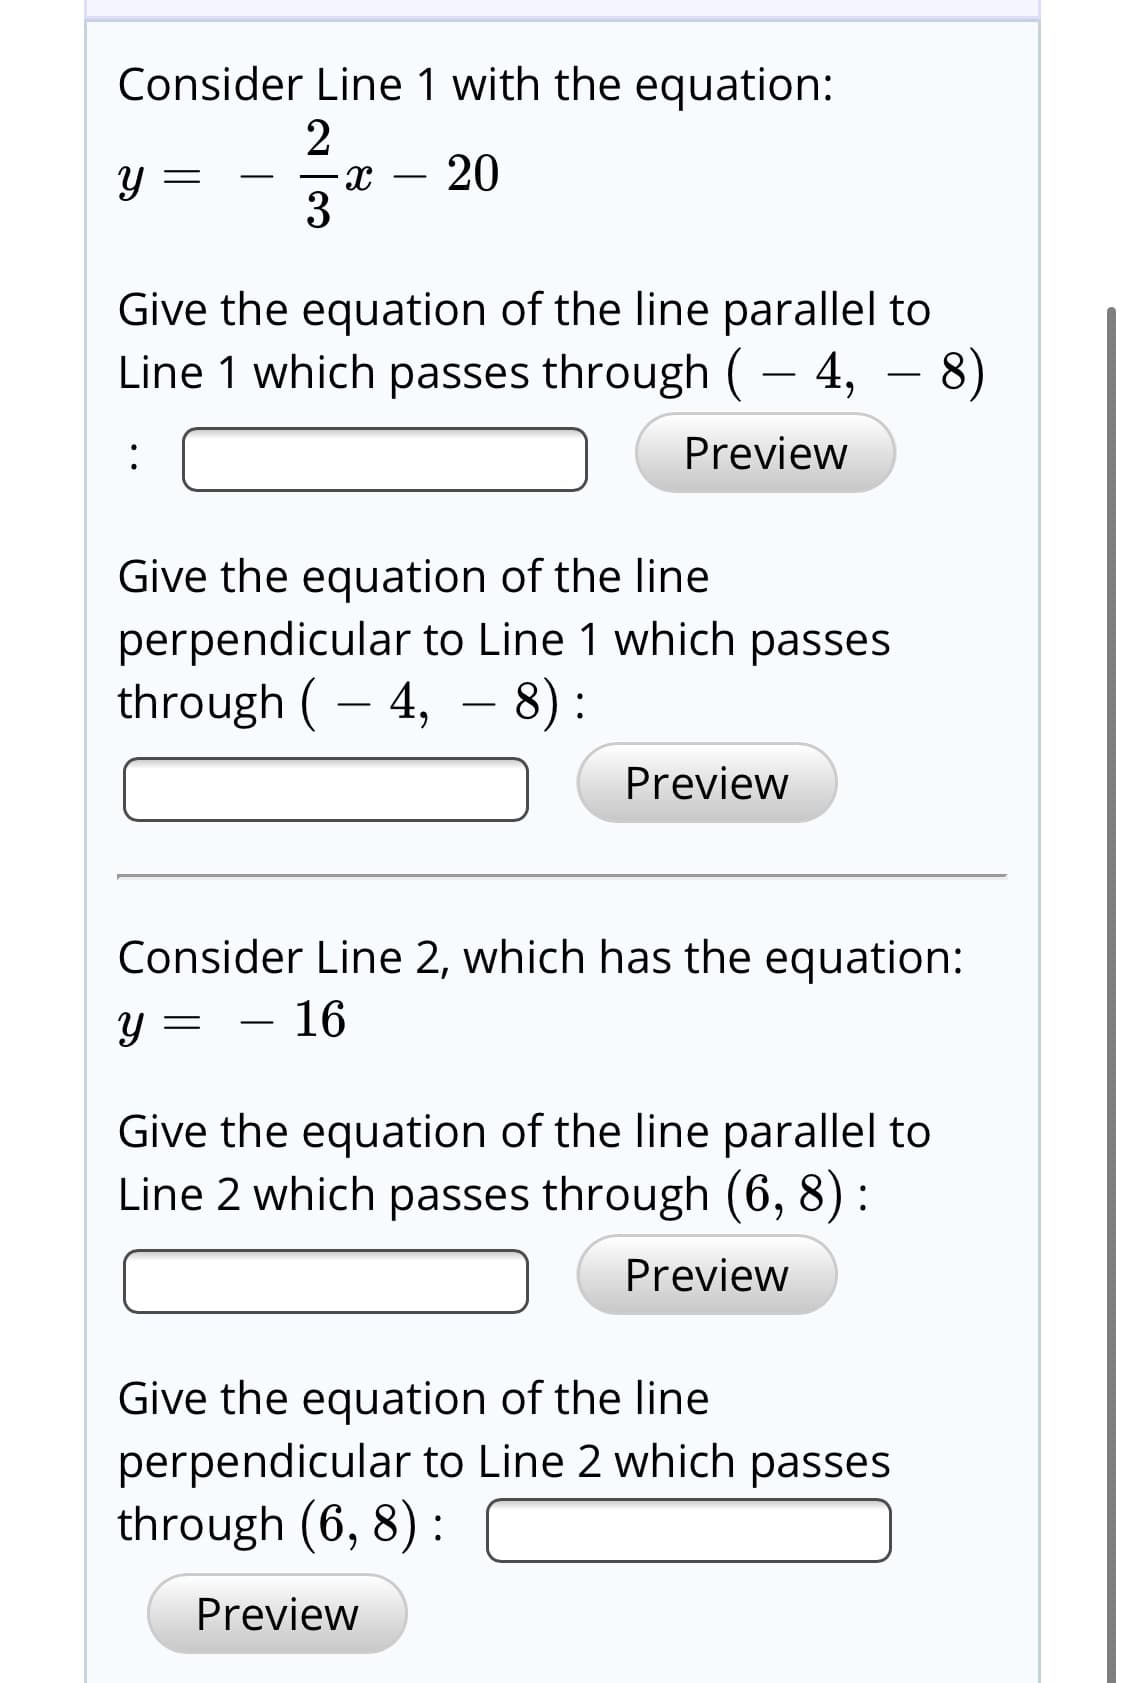 Consider Line 1 with the equation:
20
3
Give the equation of the line parallel to
Line 1 which passes through (– 4, – 8)
Preview
:
Give the equation of the line
perpendicular to Line 1 which passes
through ( – 4,
- 8):
Preview
Consider Line 2, which has the equation:
16
Give the equation of the line parallel to
Line 2 which passes through (6, 8) :
Preview
Give the equation of the line
perpendicular to Line 2 which passes
through (6, 8) :
Preview
